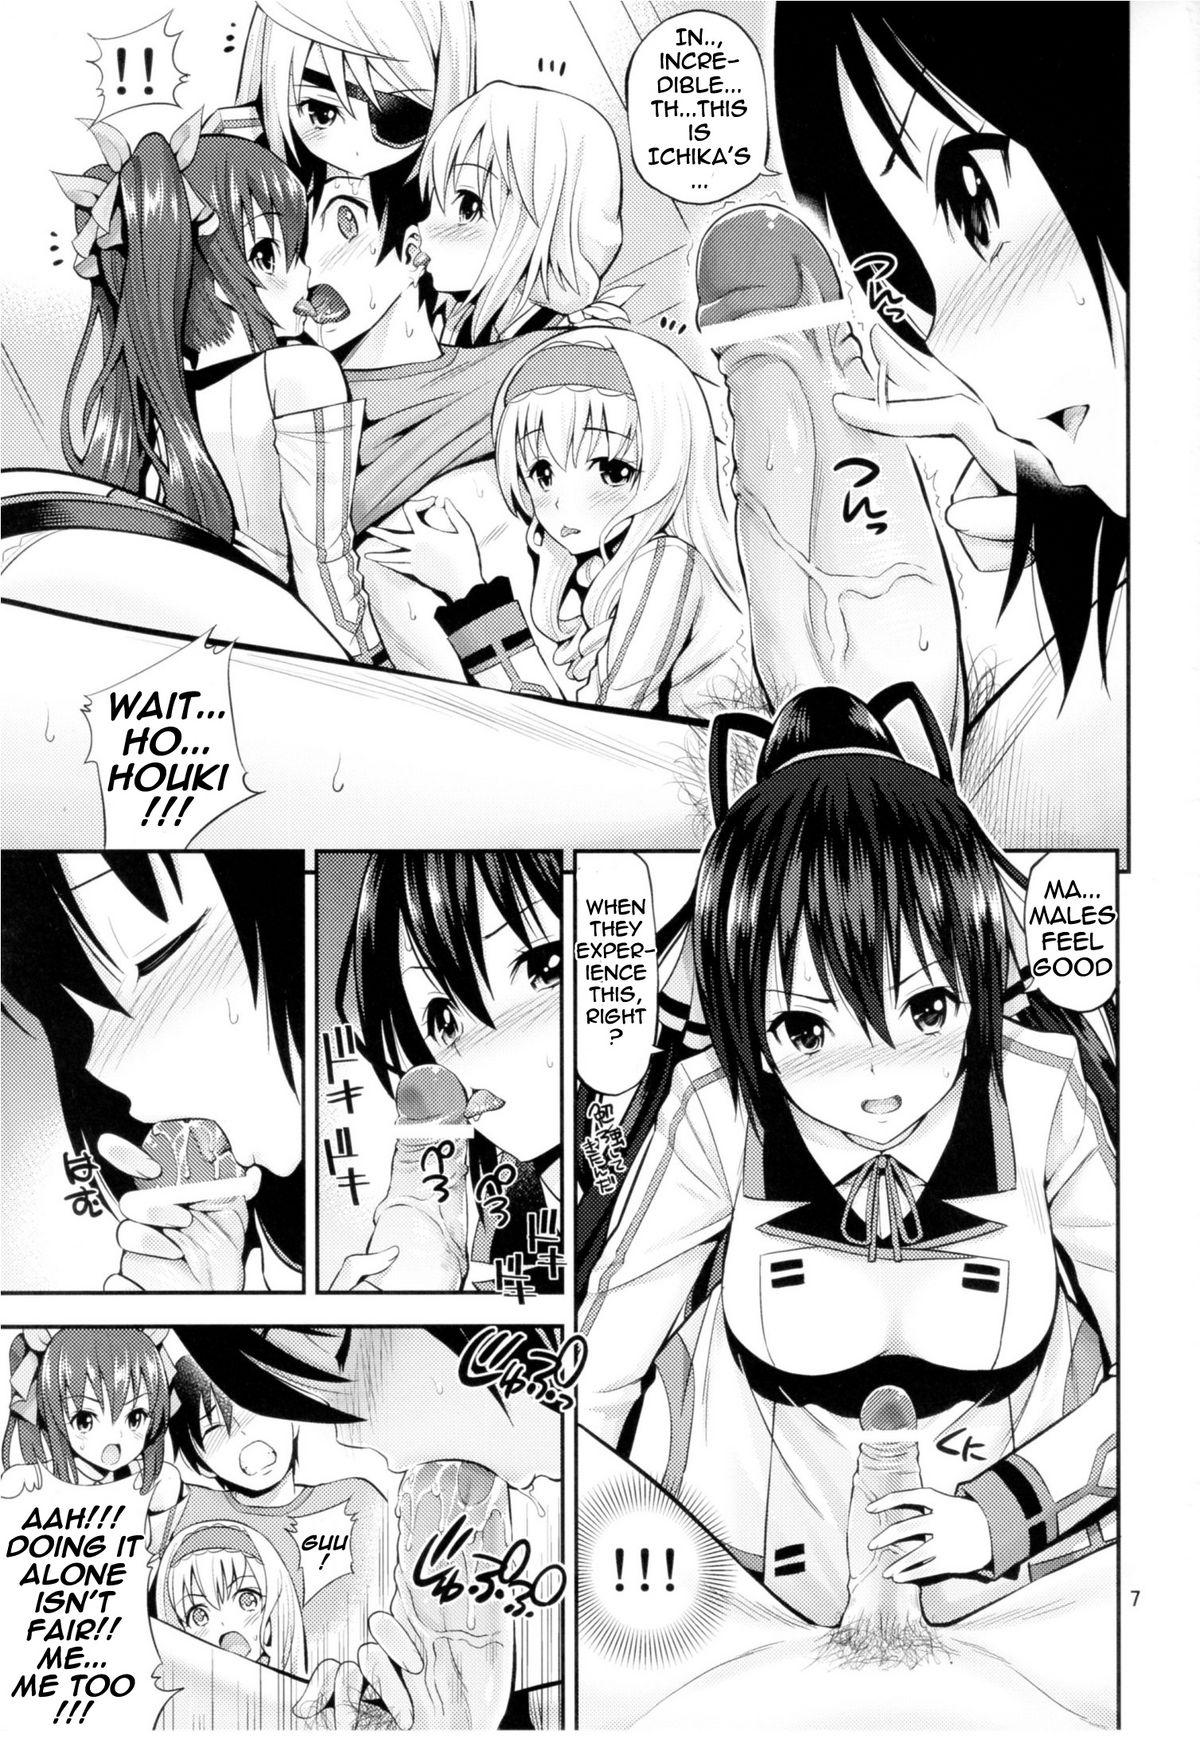 Spit This is Harlem - Infinite stratos Smooth - Page 6